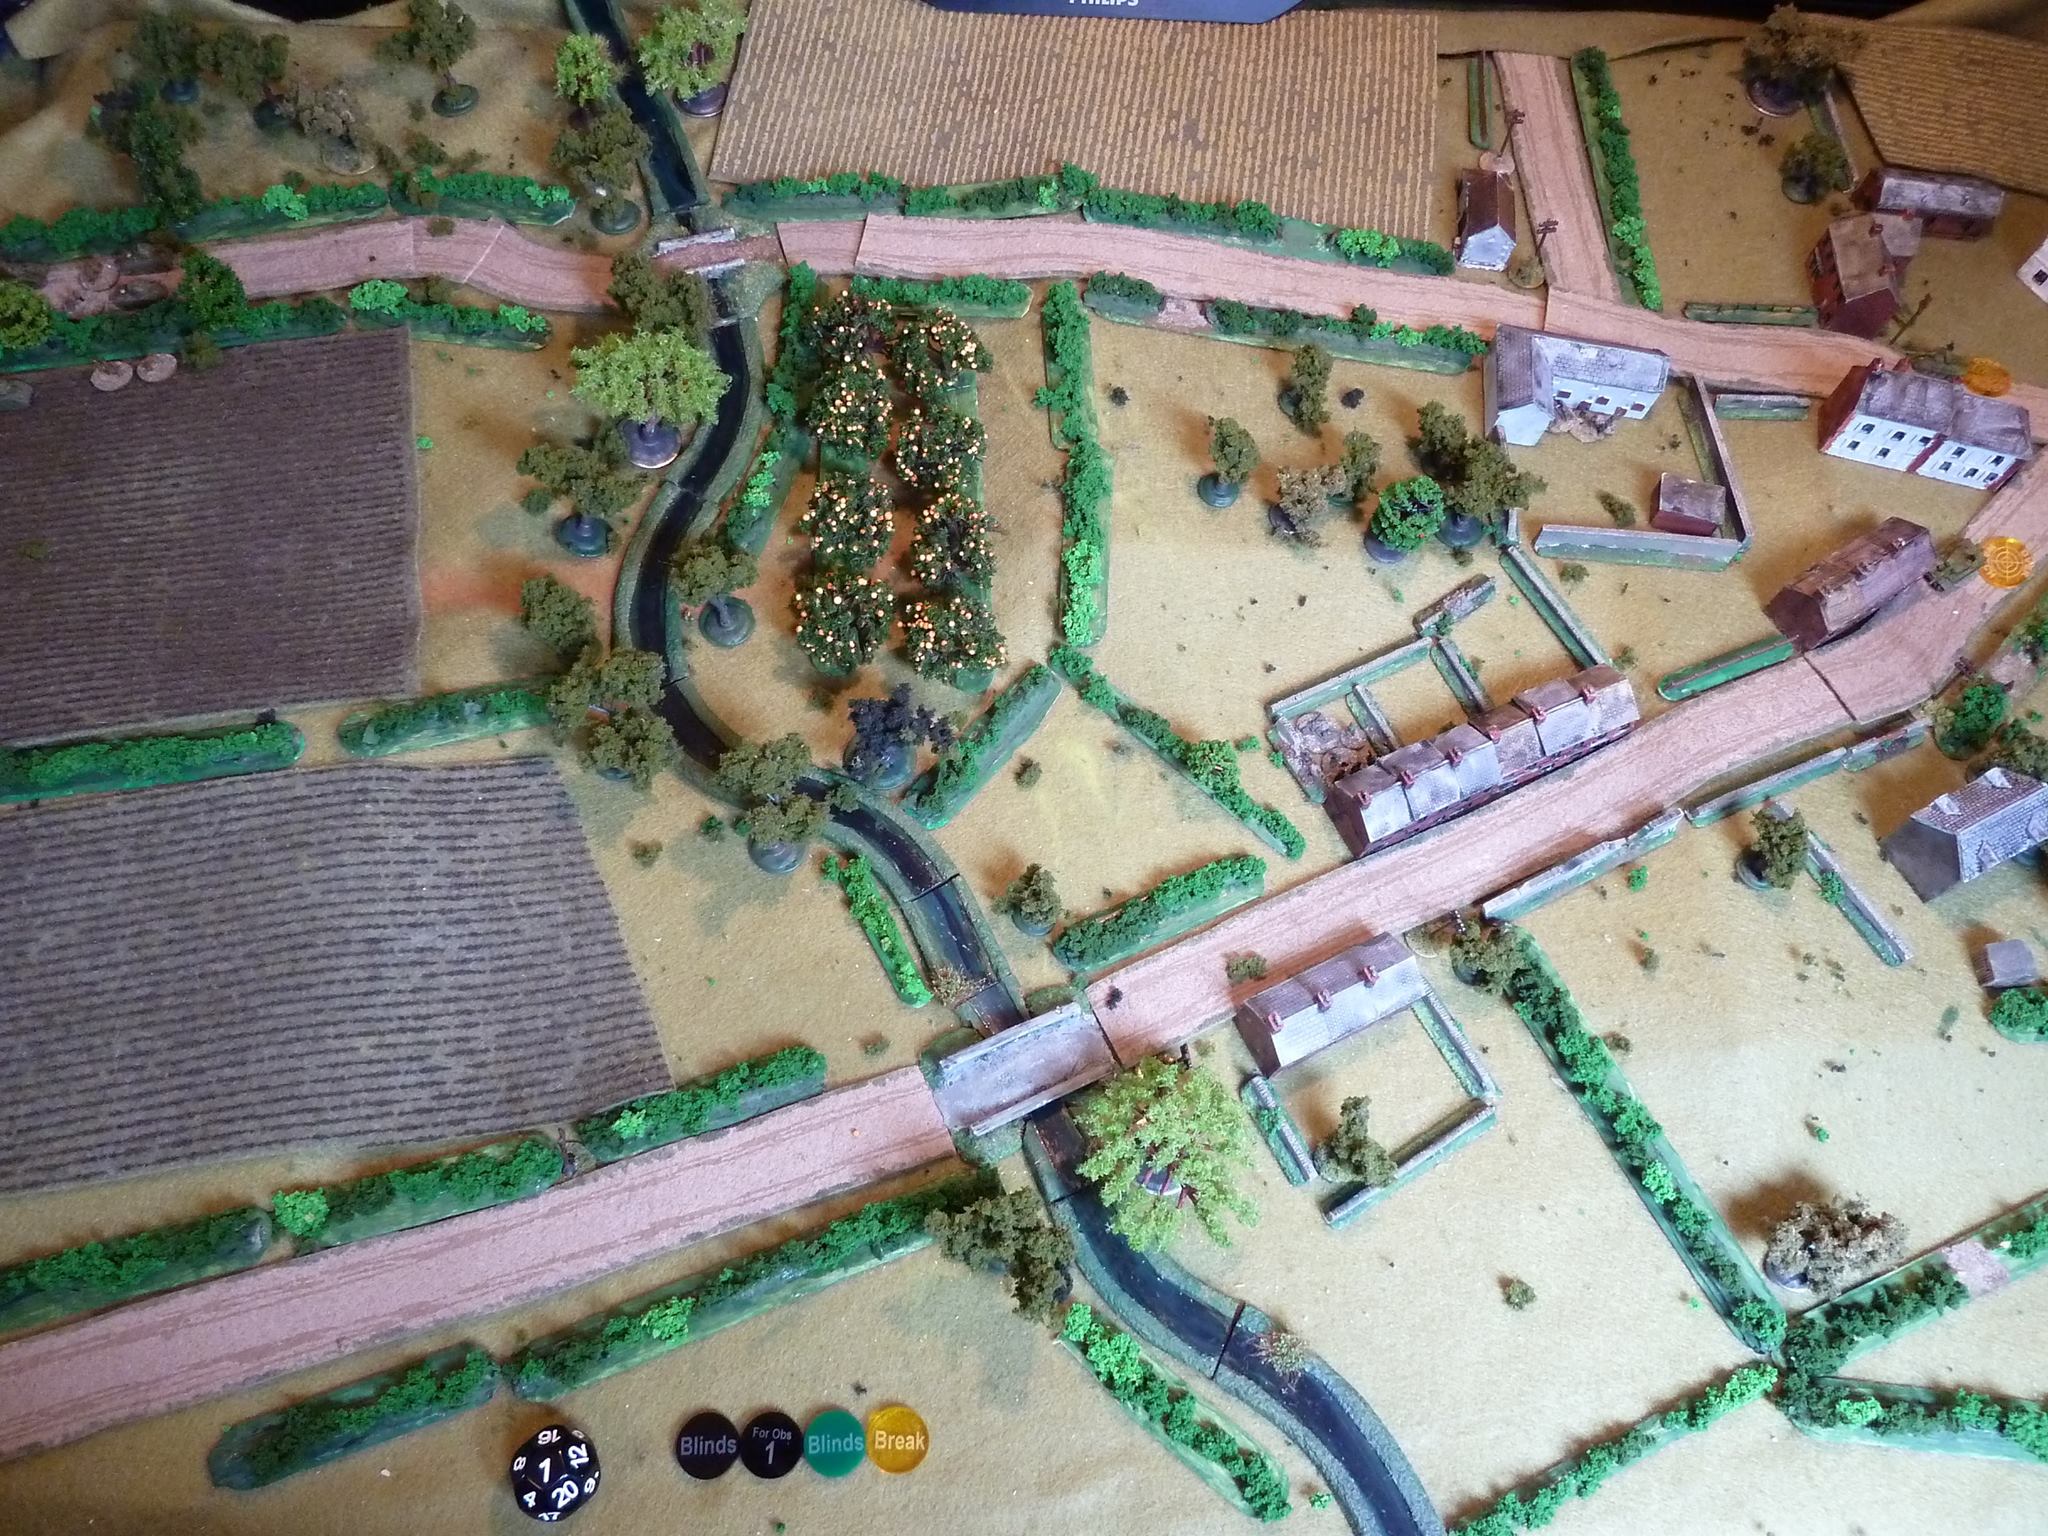  The Canadians enter top left, initially with a platoon of Shermans and infantry.&nbsp;  The plan is to advance a tank/infantry force up either side of the top road through the panted field and orchard to seize the crossroads. 